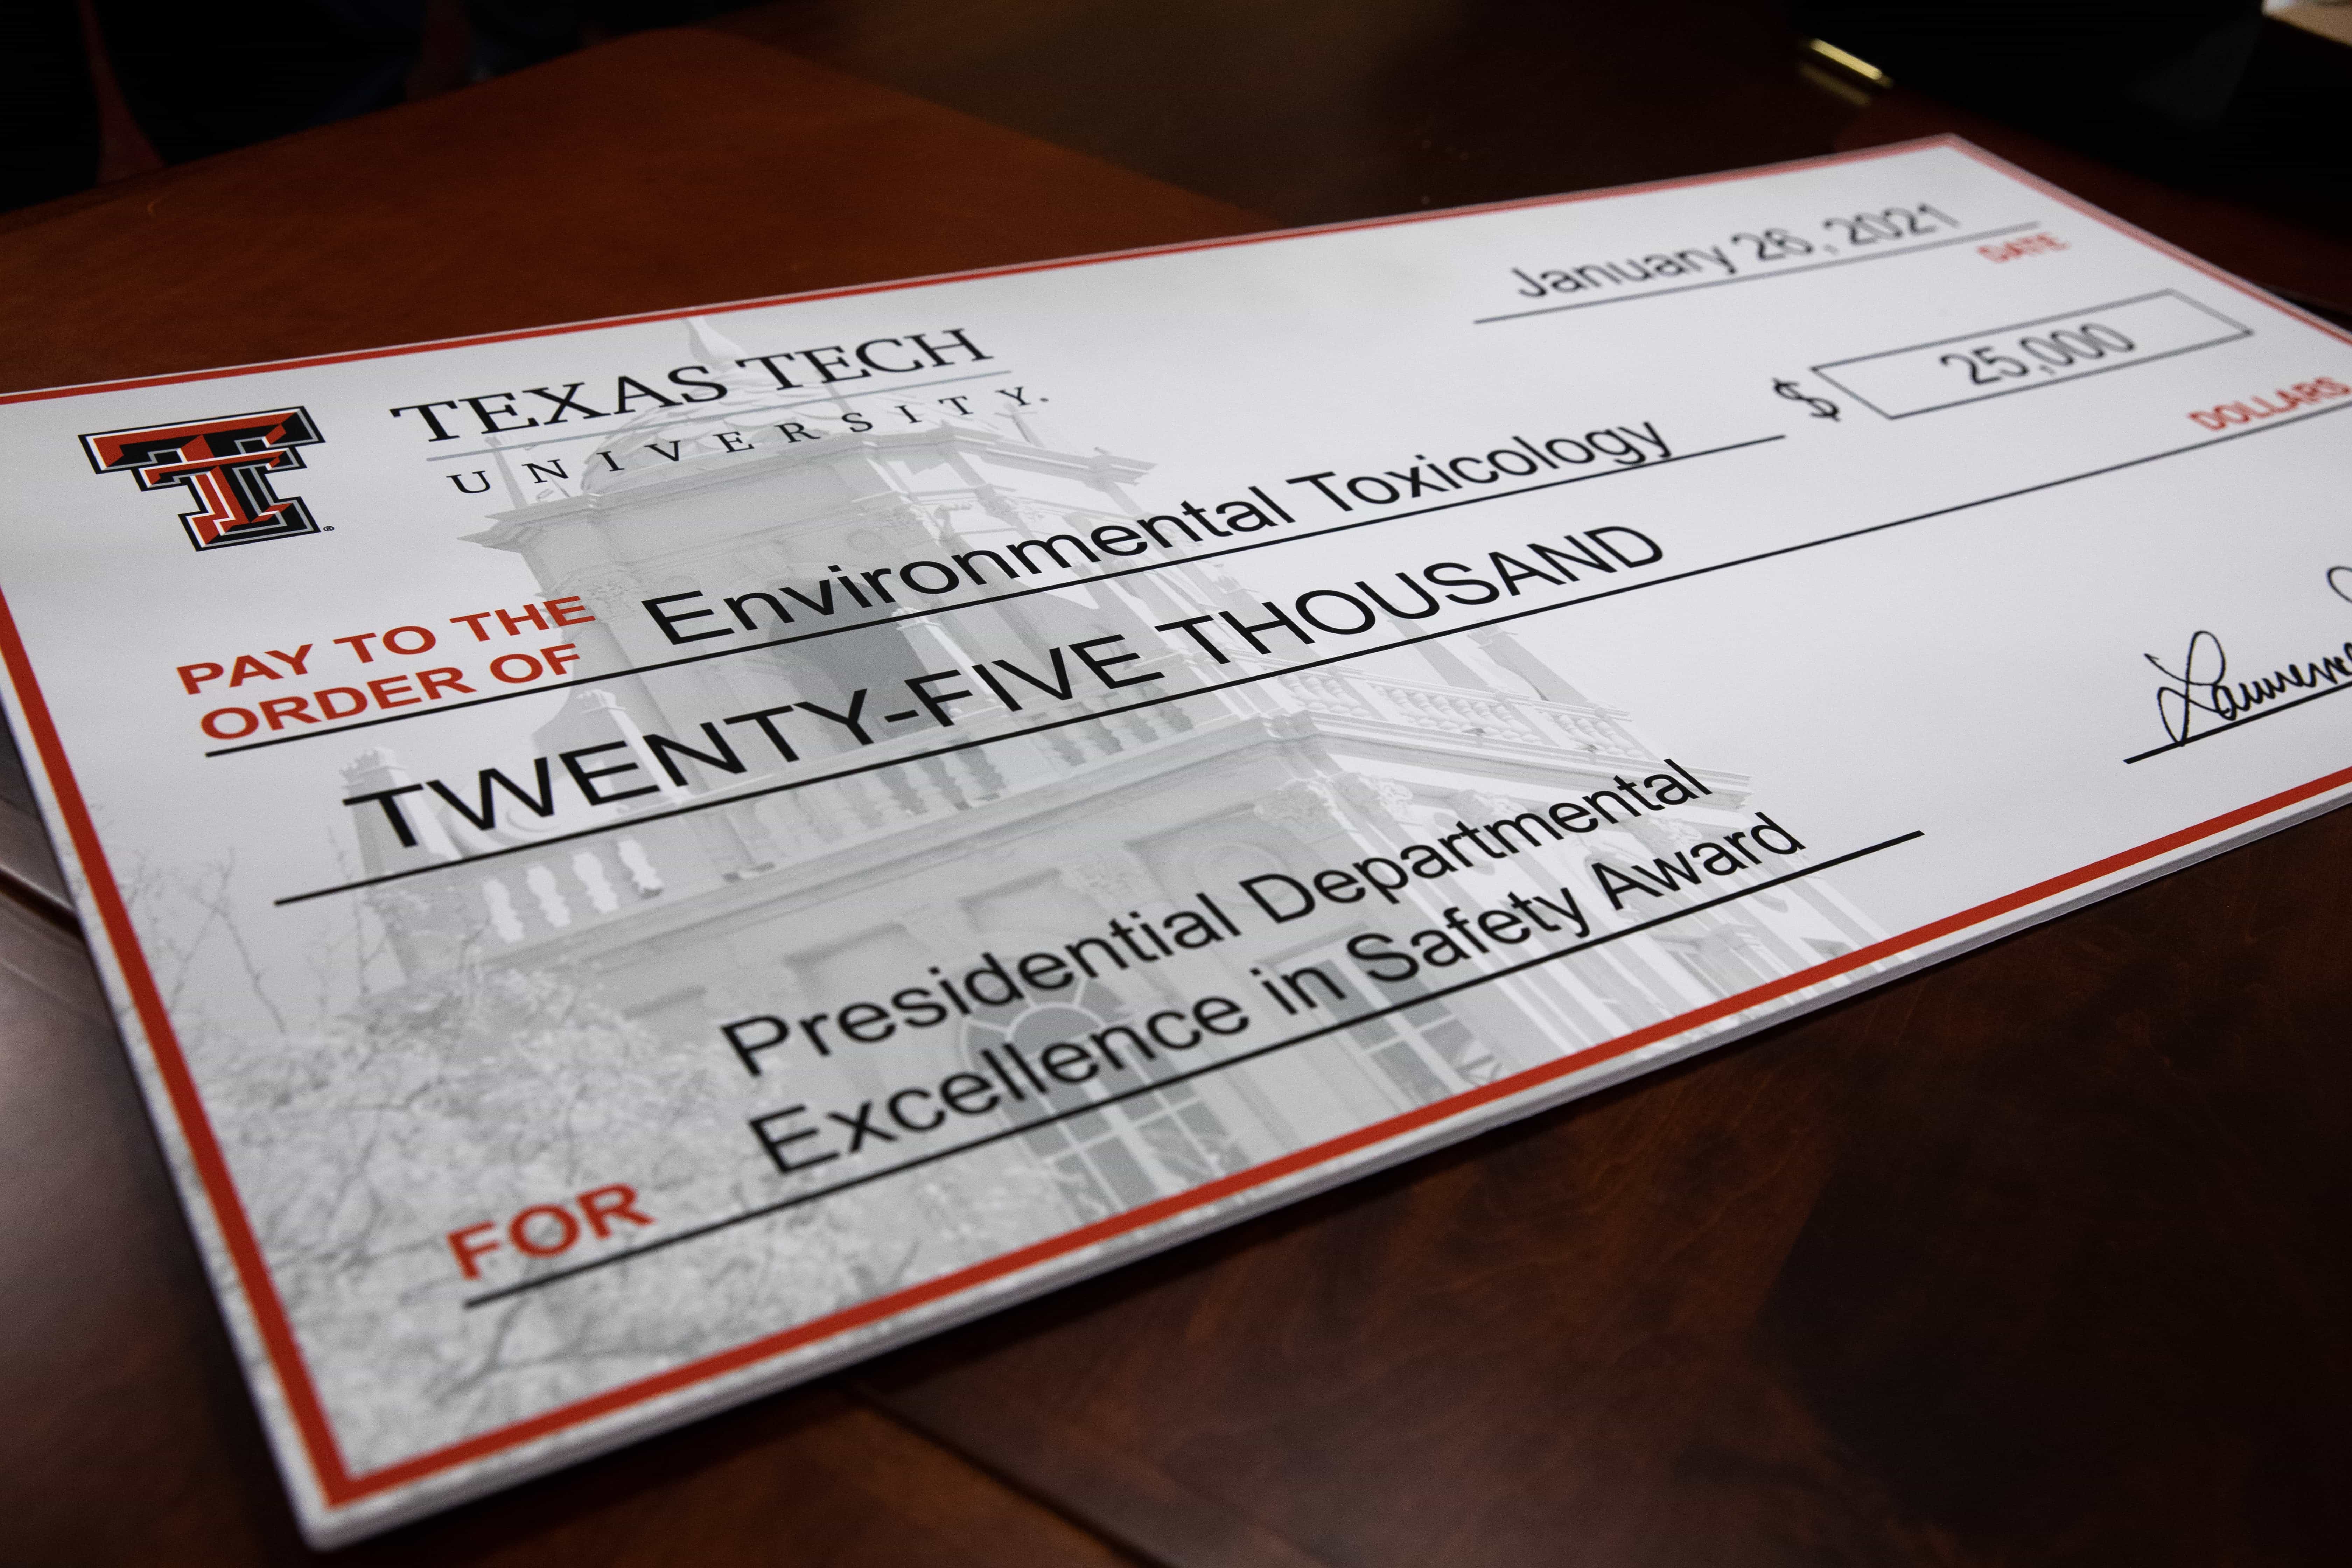 Image of the check